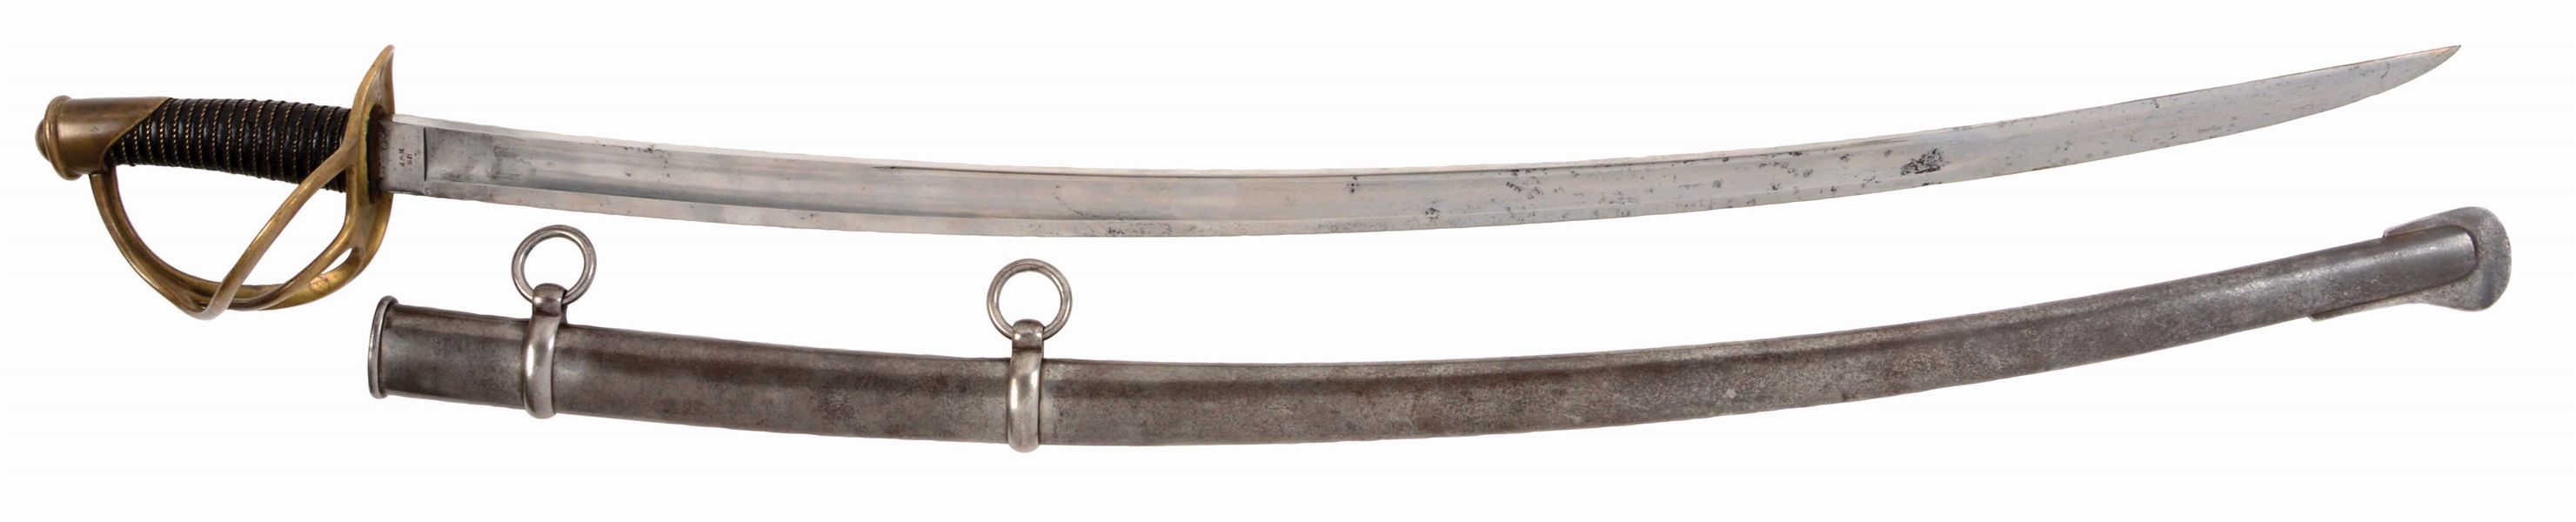 A VERY GOOD PRE-WAR 1845 PRODUCTION AMES 1840 CAVALRY SABER.